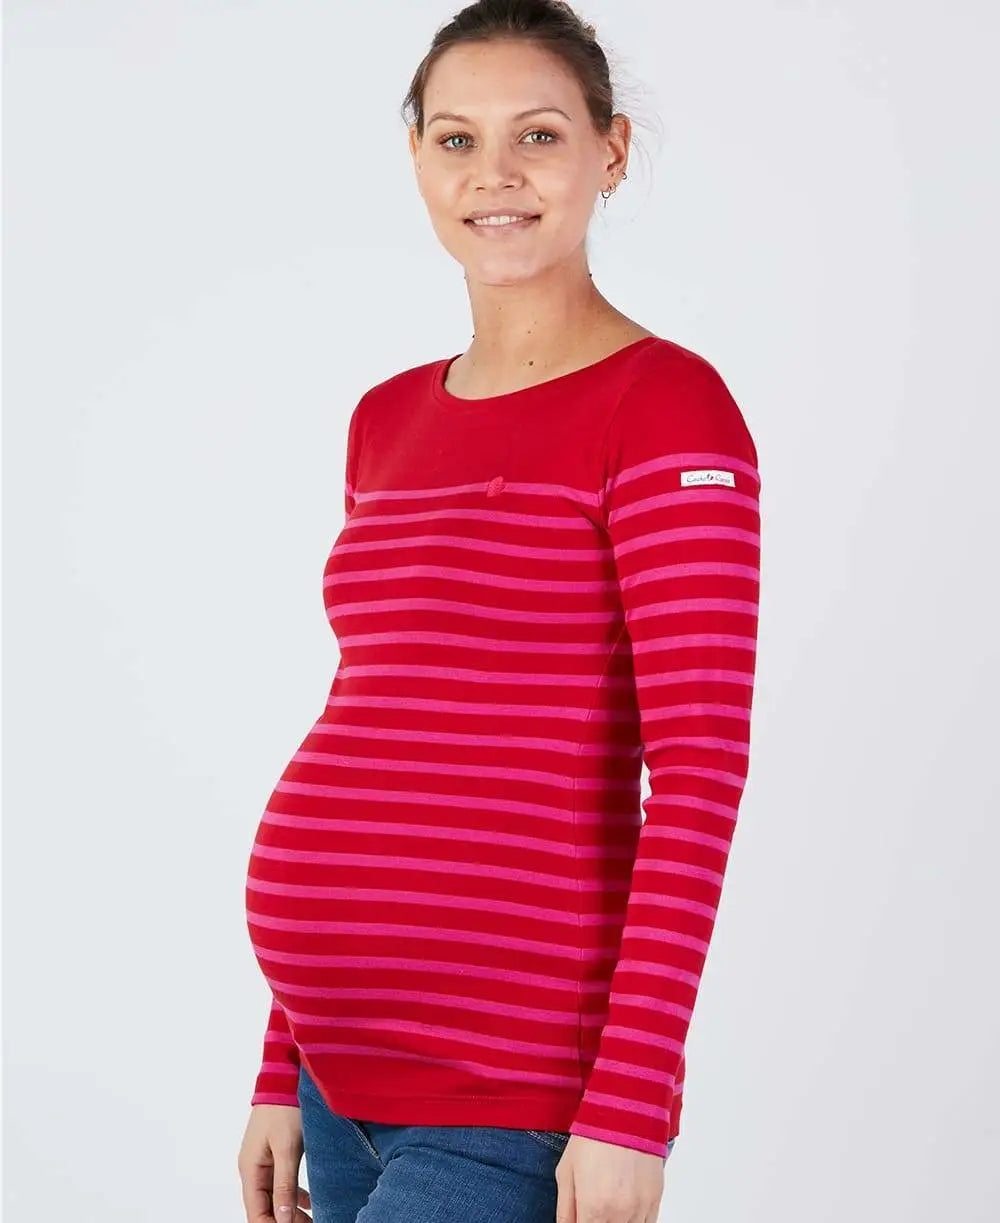 Maternity top Brest - Made in France red and fuschia